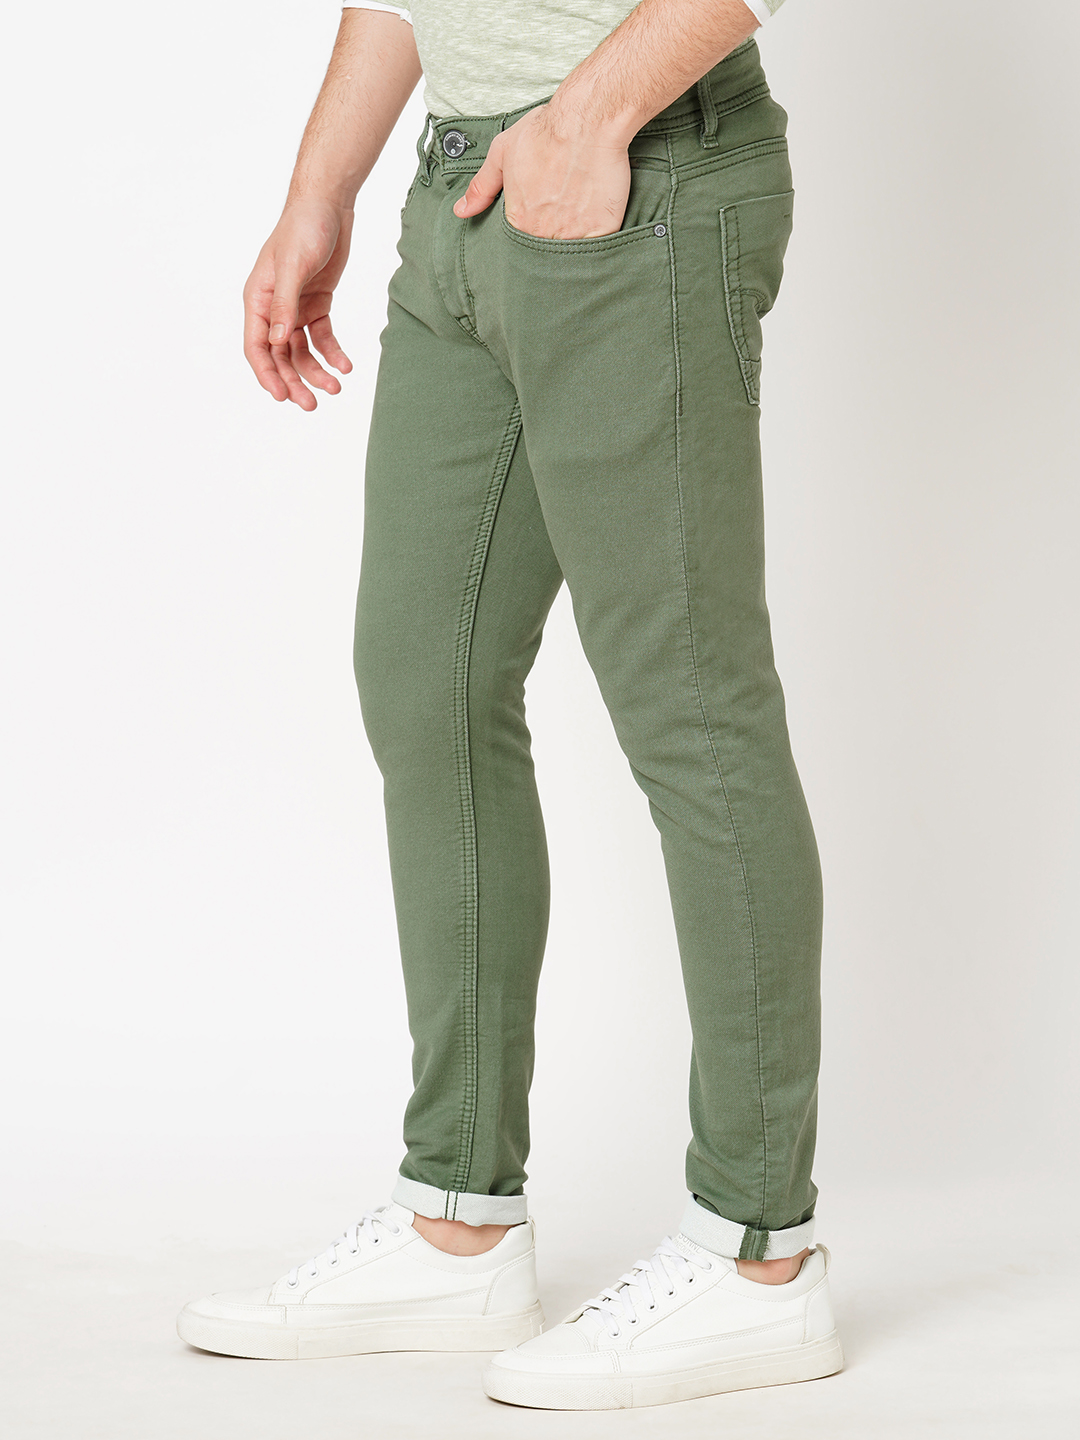 MINT GREEN 5 POCKET LOW-RISE ANKLE LENGTH JEANS (SPRINGSTEEN FIT)